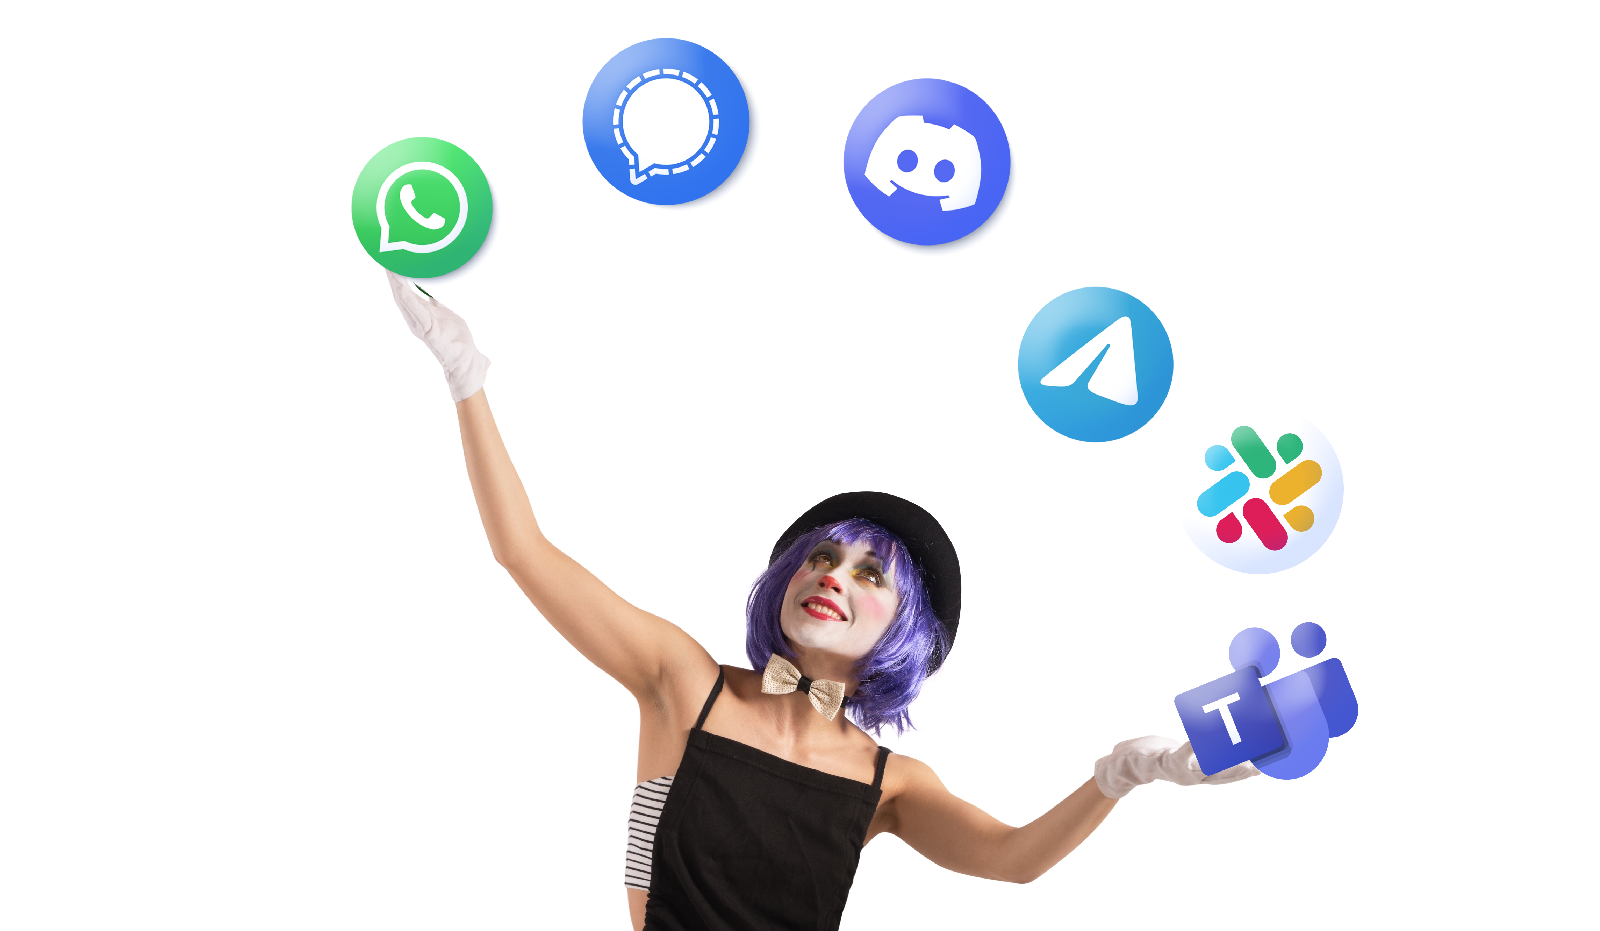 a woman in clown make-up juggling icons for popular chat systems - WhatsApp, Signal, Discord, Telegram, Slack, Teams